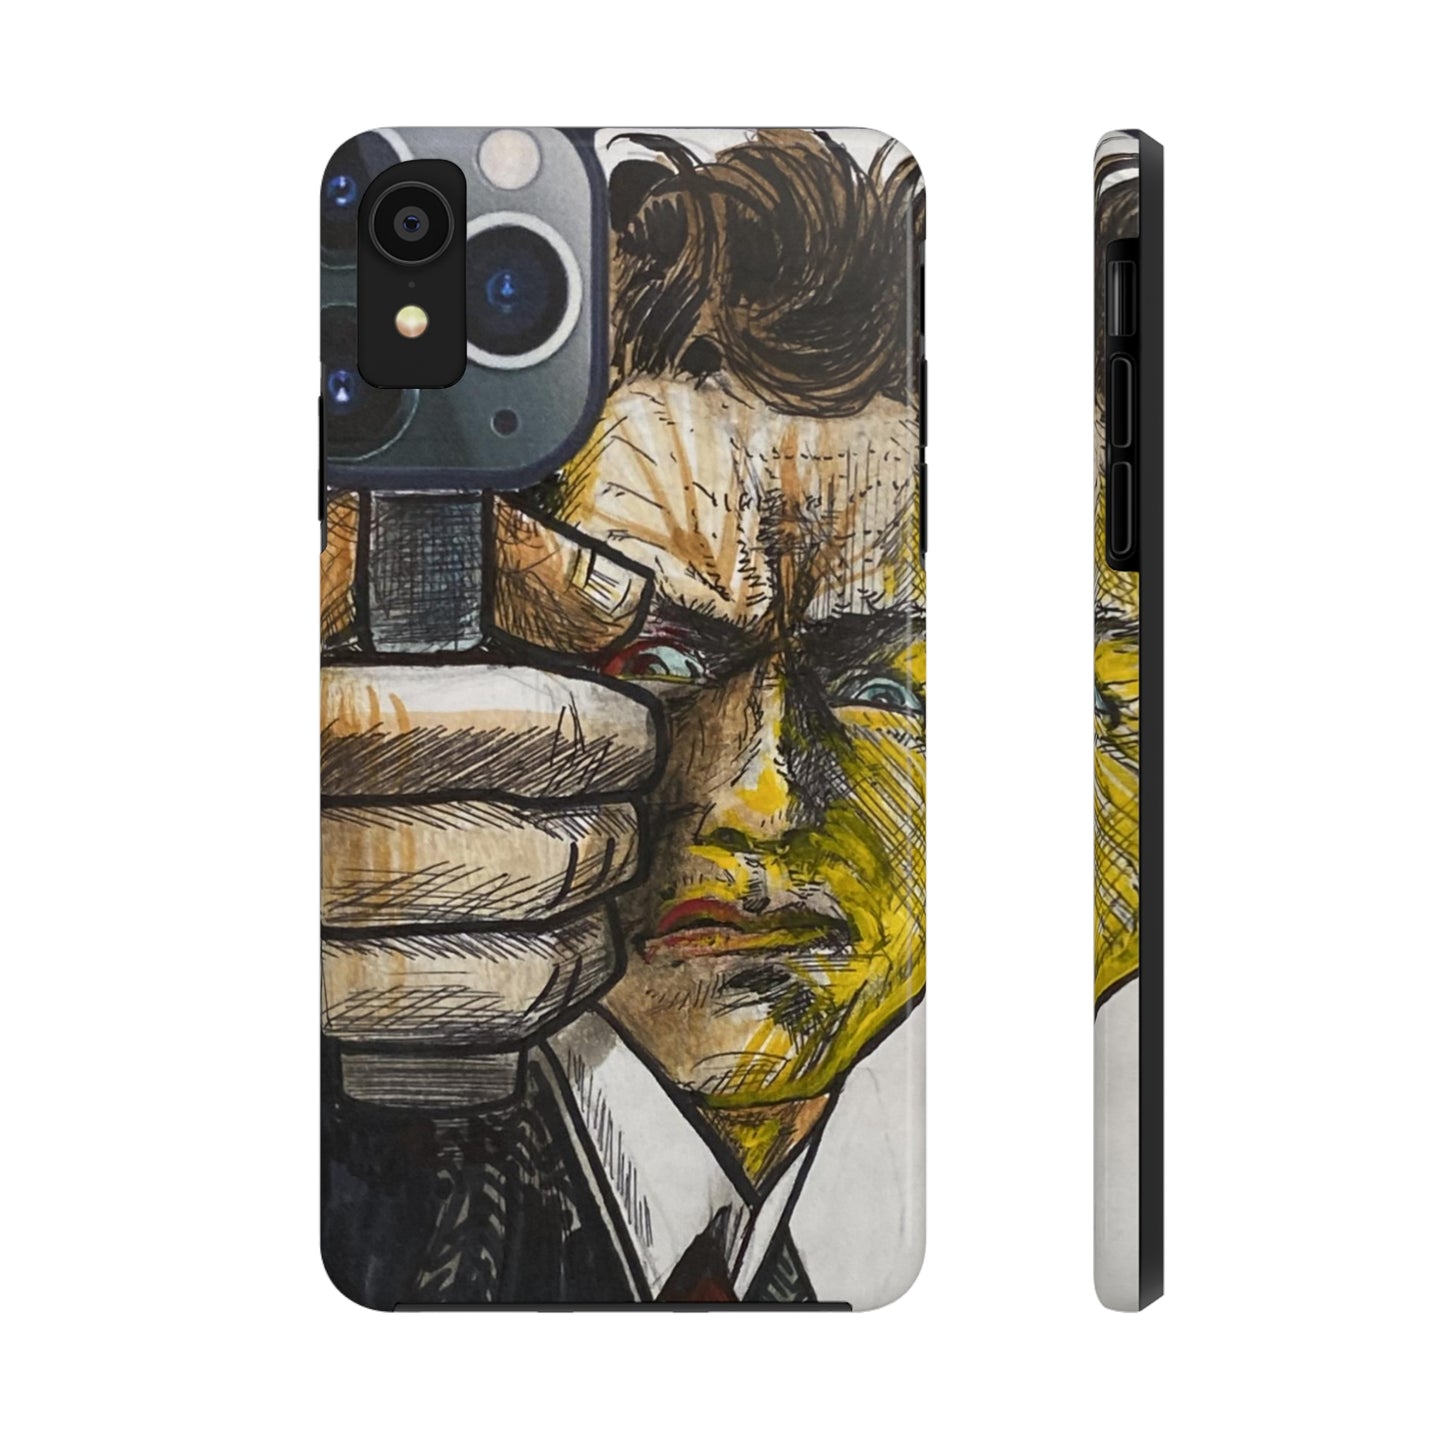 Case Mate Tough Phone Cases Featuring "Dirty Harry" fan art by #ShallyBrady